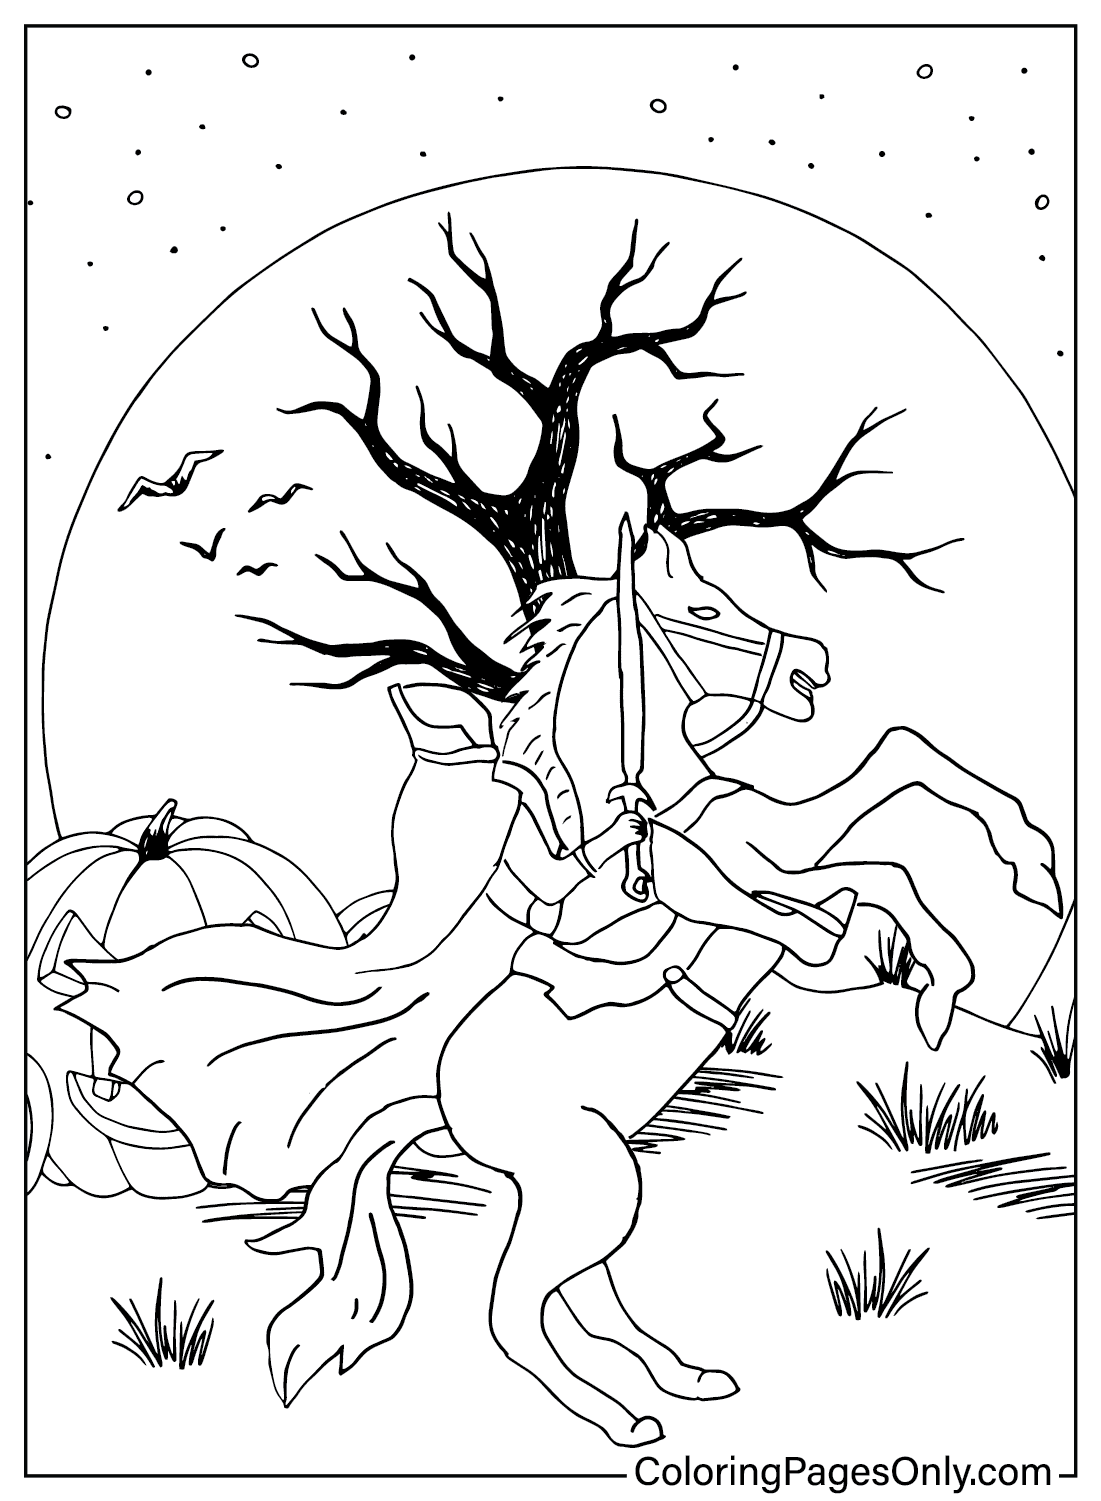 Headless Horseman Coloring Pages to Printable from Headless Horseman